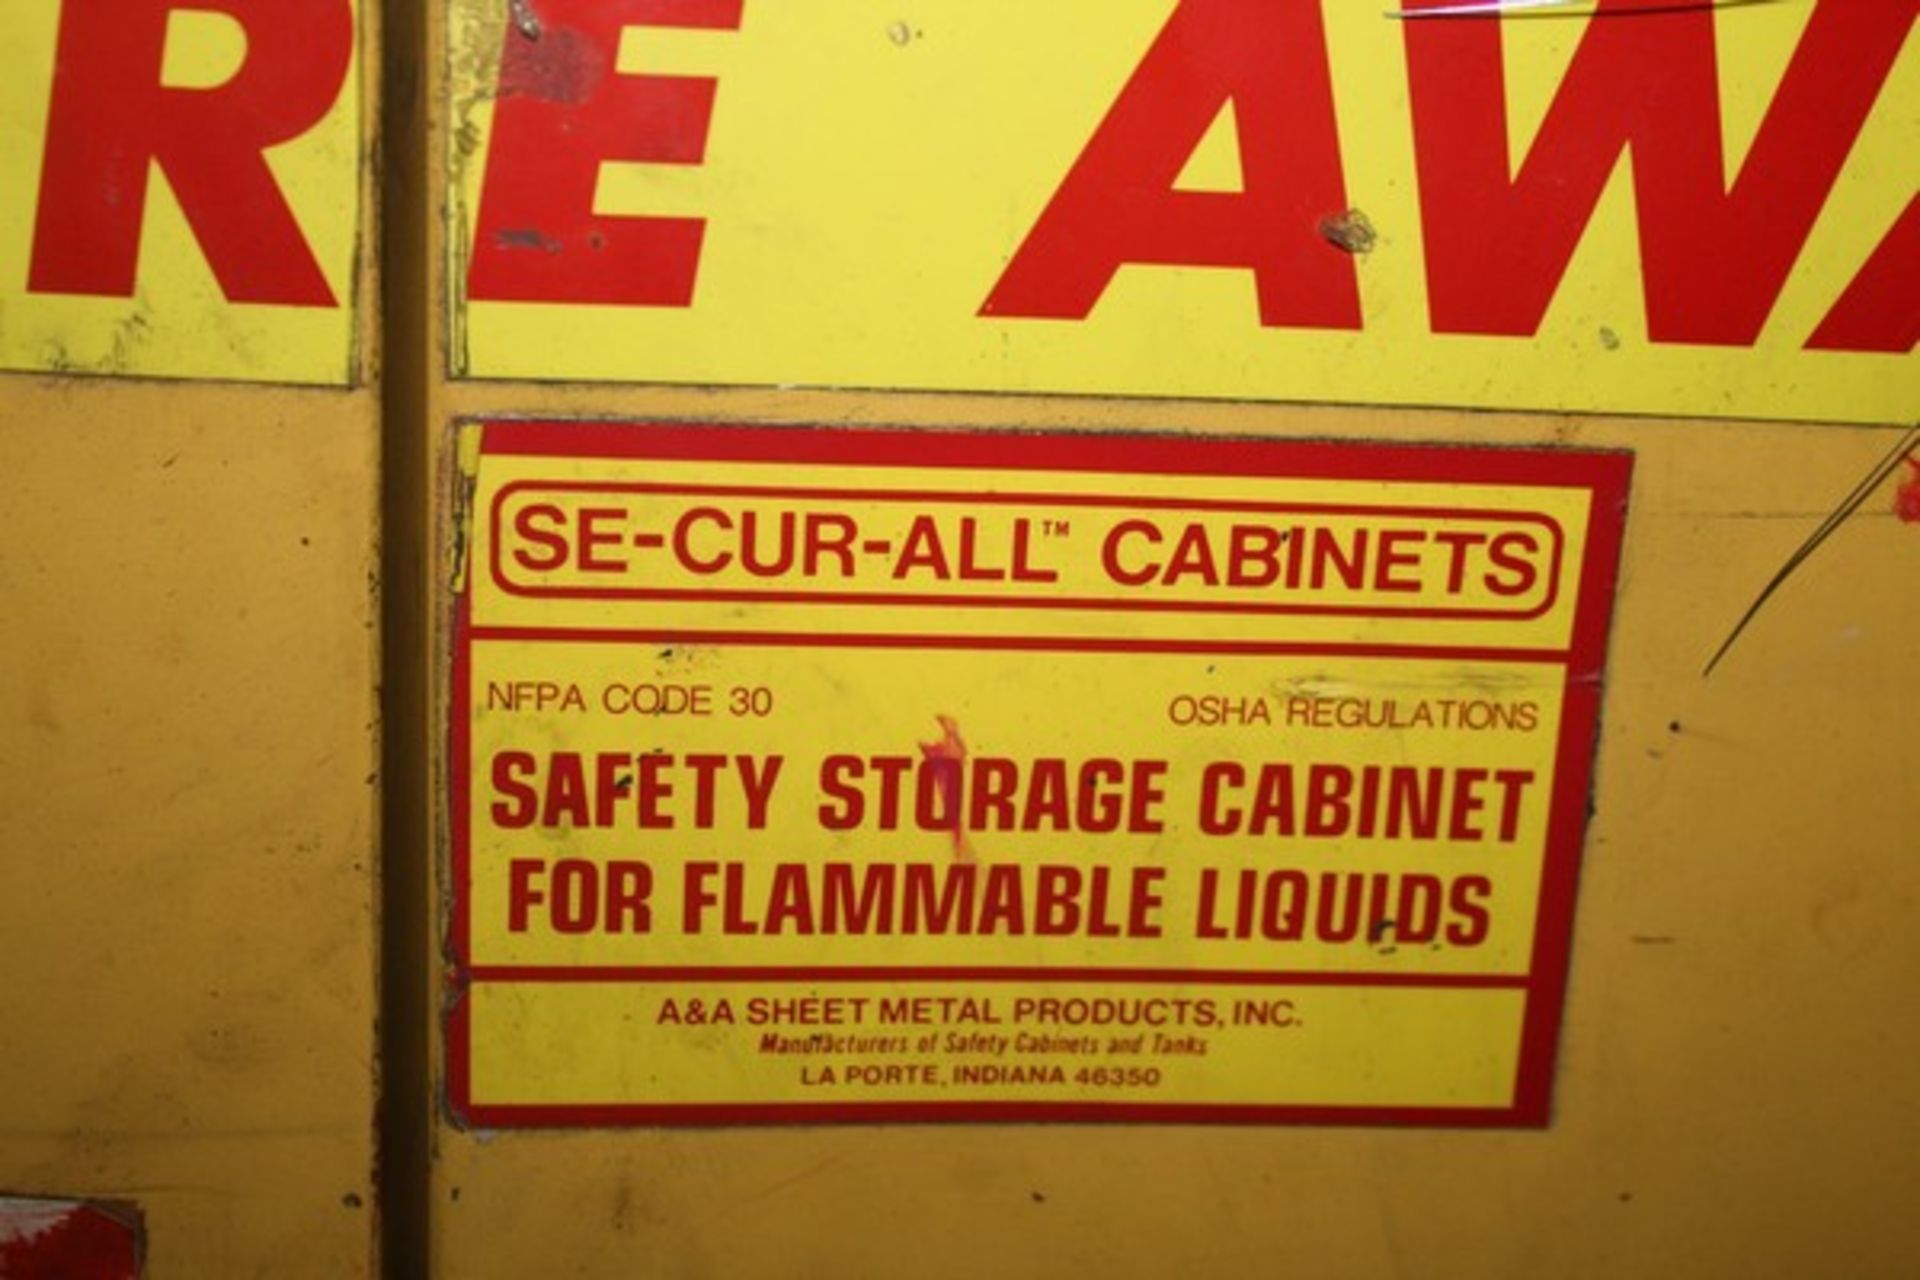 SE-CUR-ALL FLAMMABLE LIQUID STORAGE CABINET, 50 X 34" X 50" - Image 2 of 3